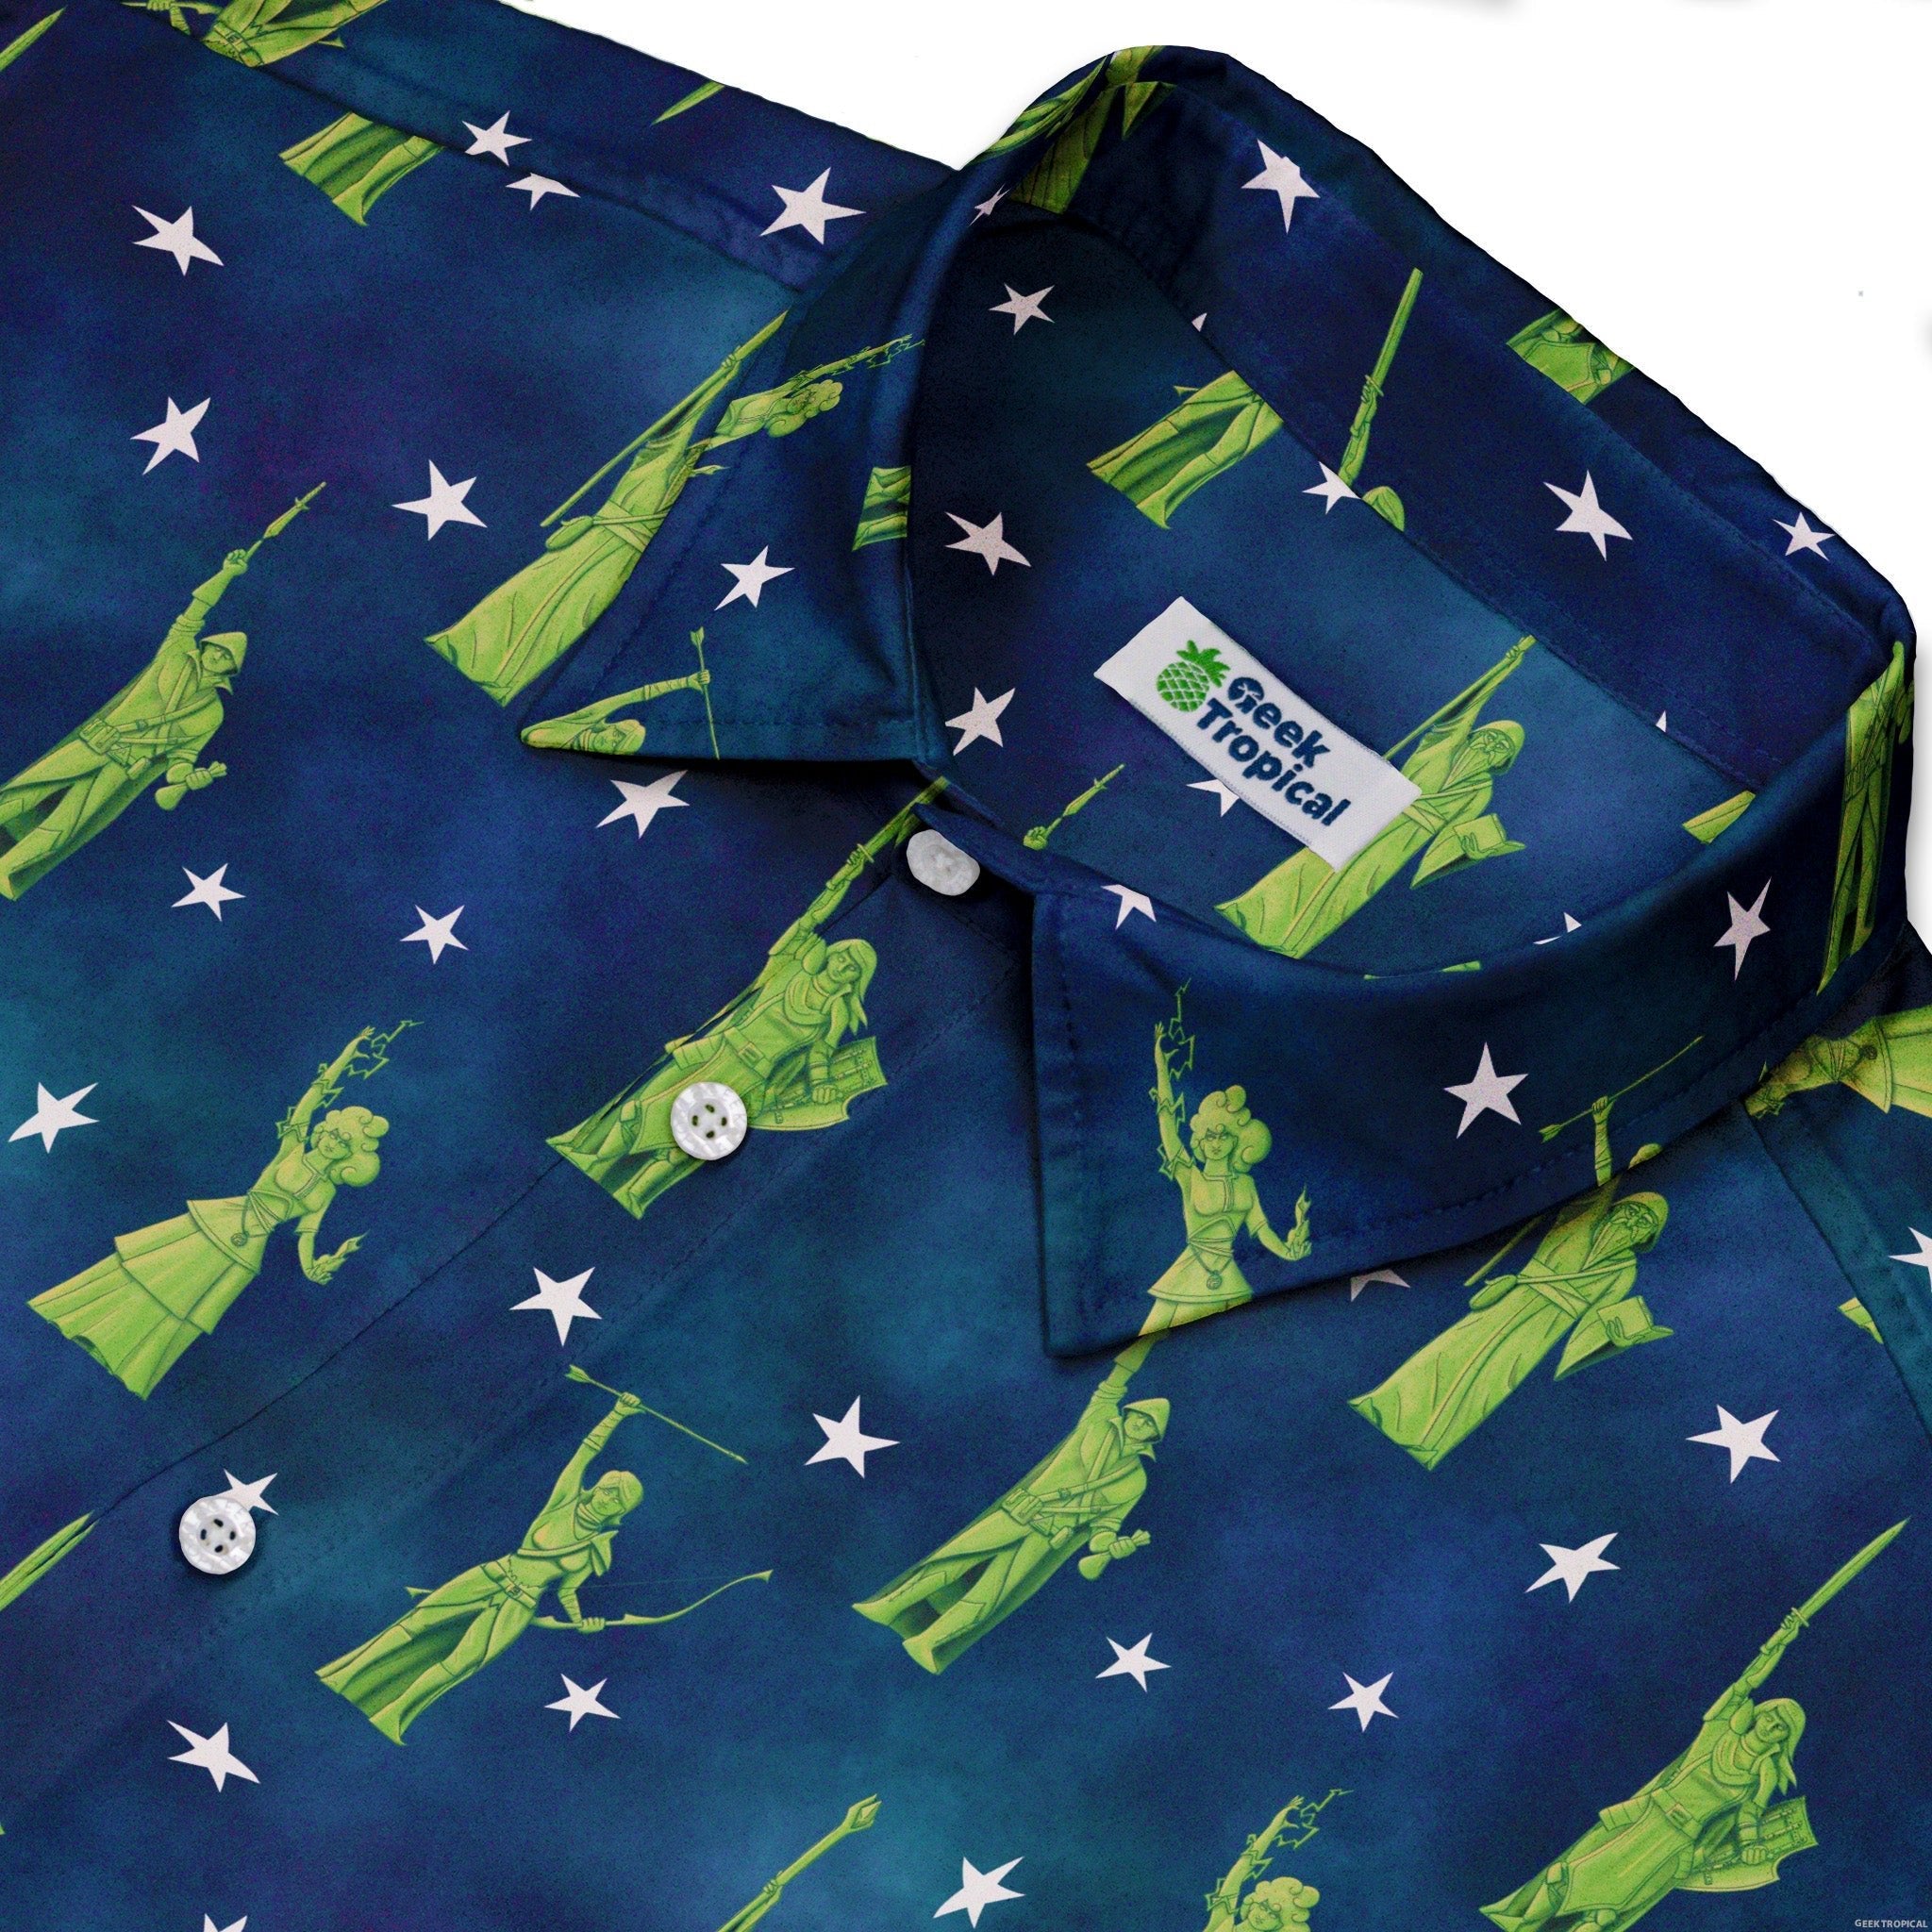 Lady Liberty Dnd Class Button Up Shirt - adult sizing - Designs by Nathan - dnd & rpg print